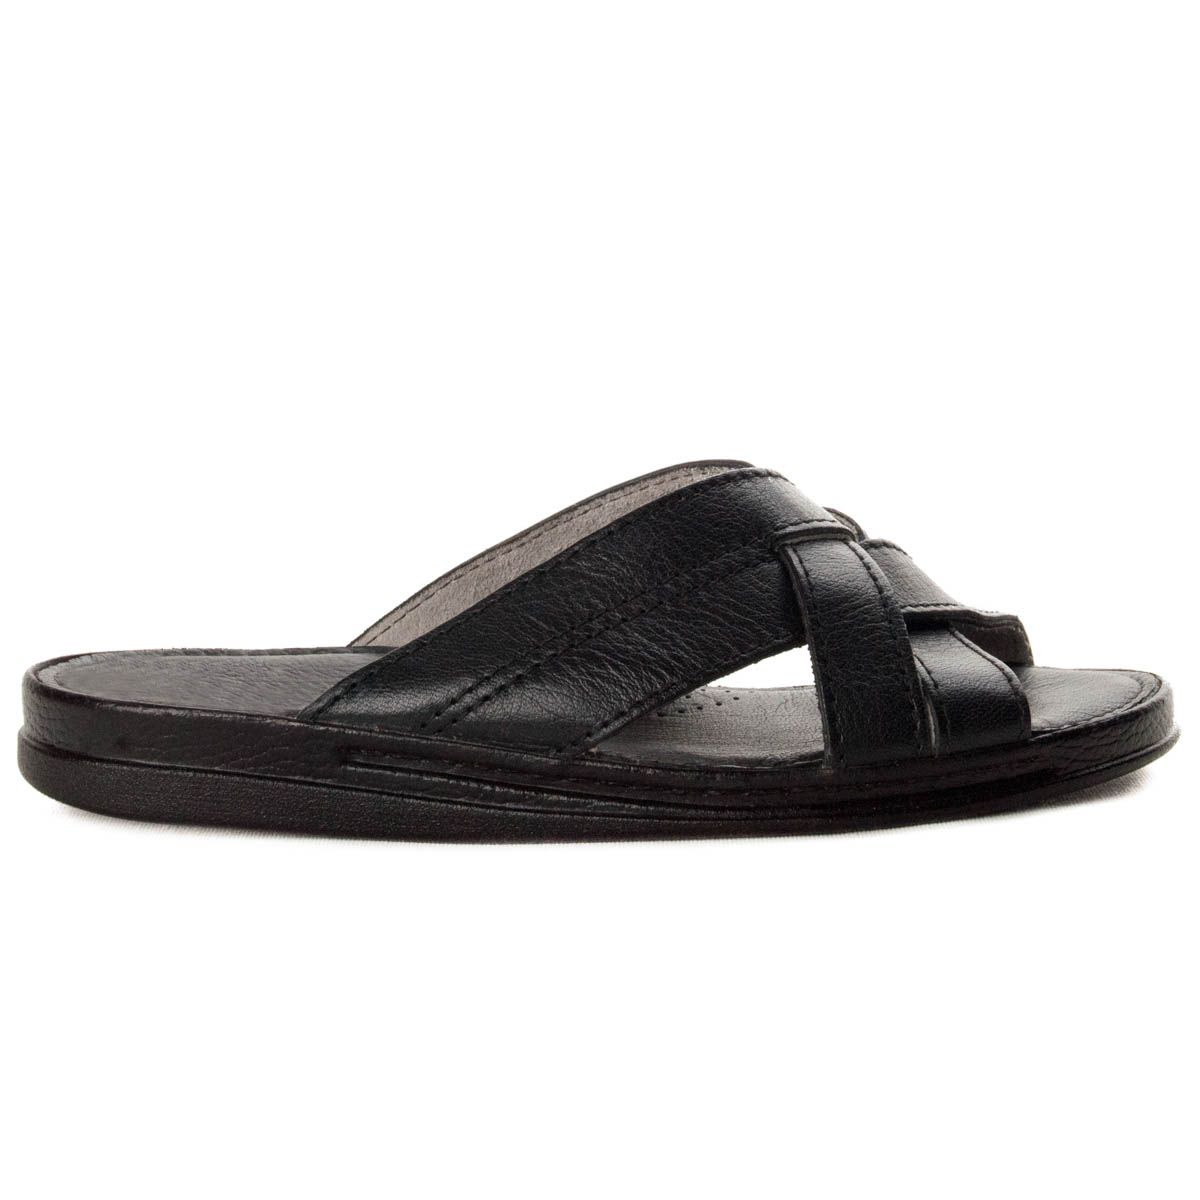 Men's skin sandal, with maximum comfort on the floor, by its gel, soft and padded template. Anatomical It consists of several crossed strips in the front. Very summer for his style. Made in Spain,